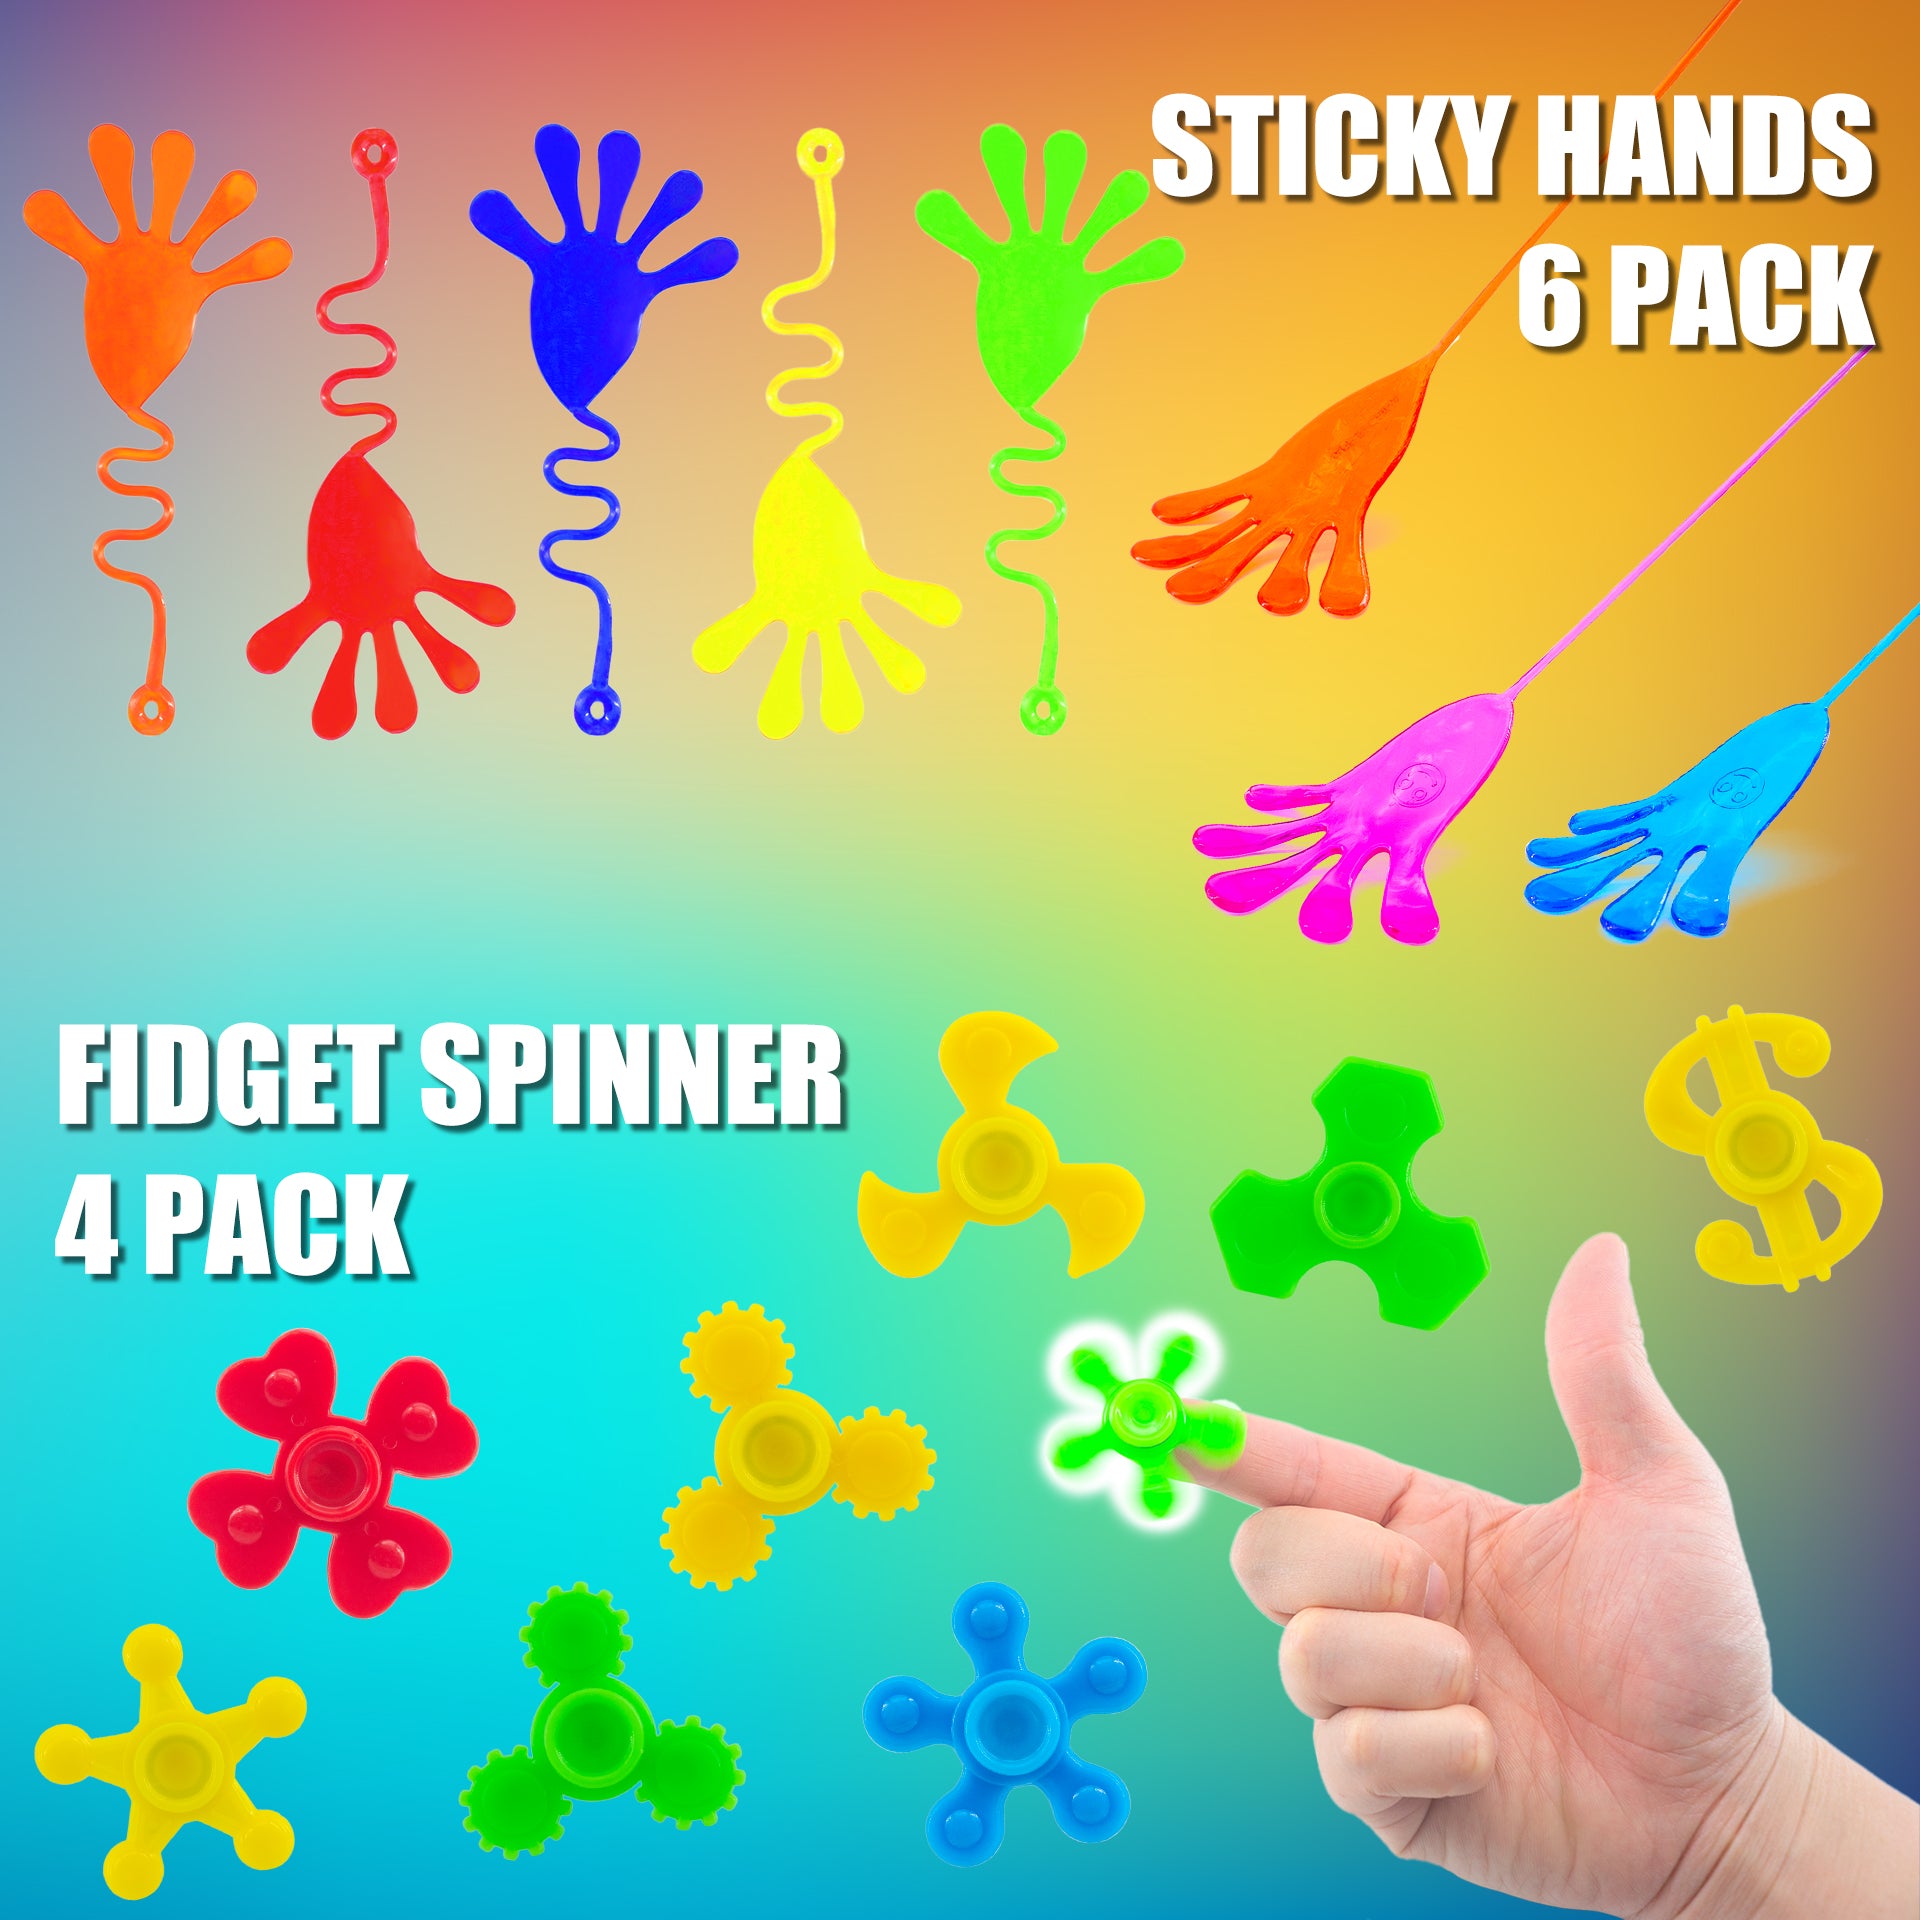 Buy Pack of 5 Fidget Spinners Toys for Kids Return Gifts Hand